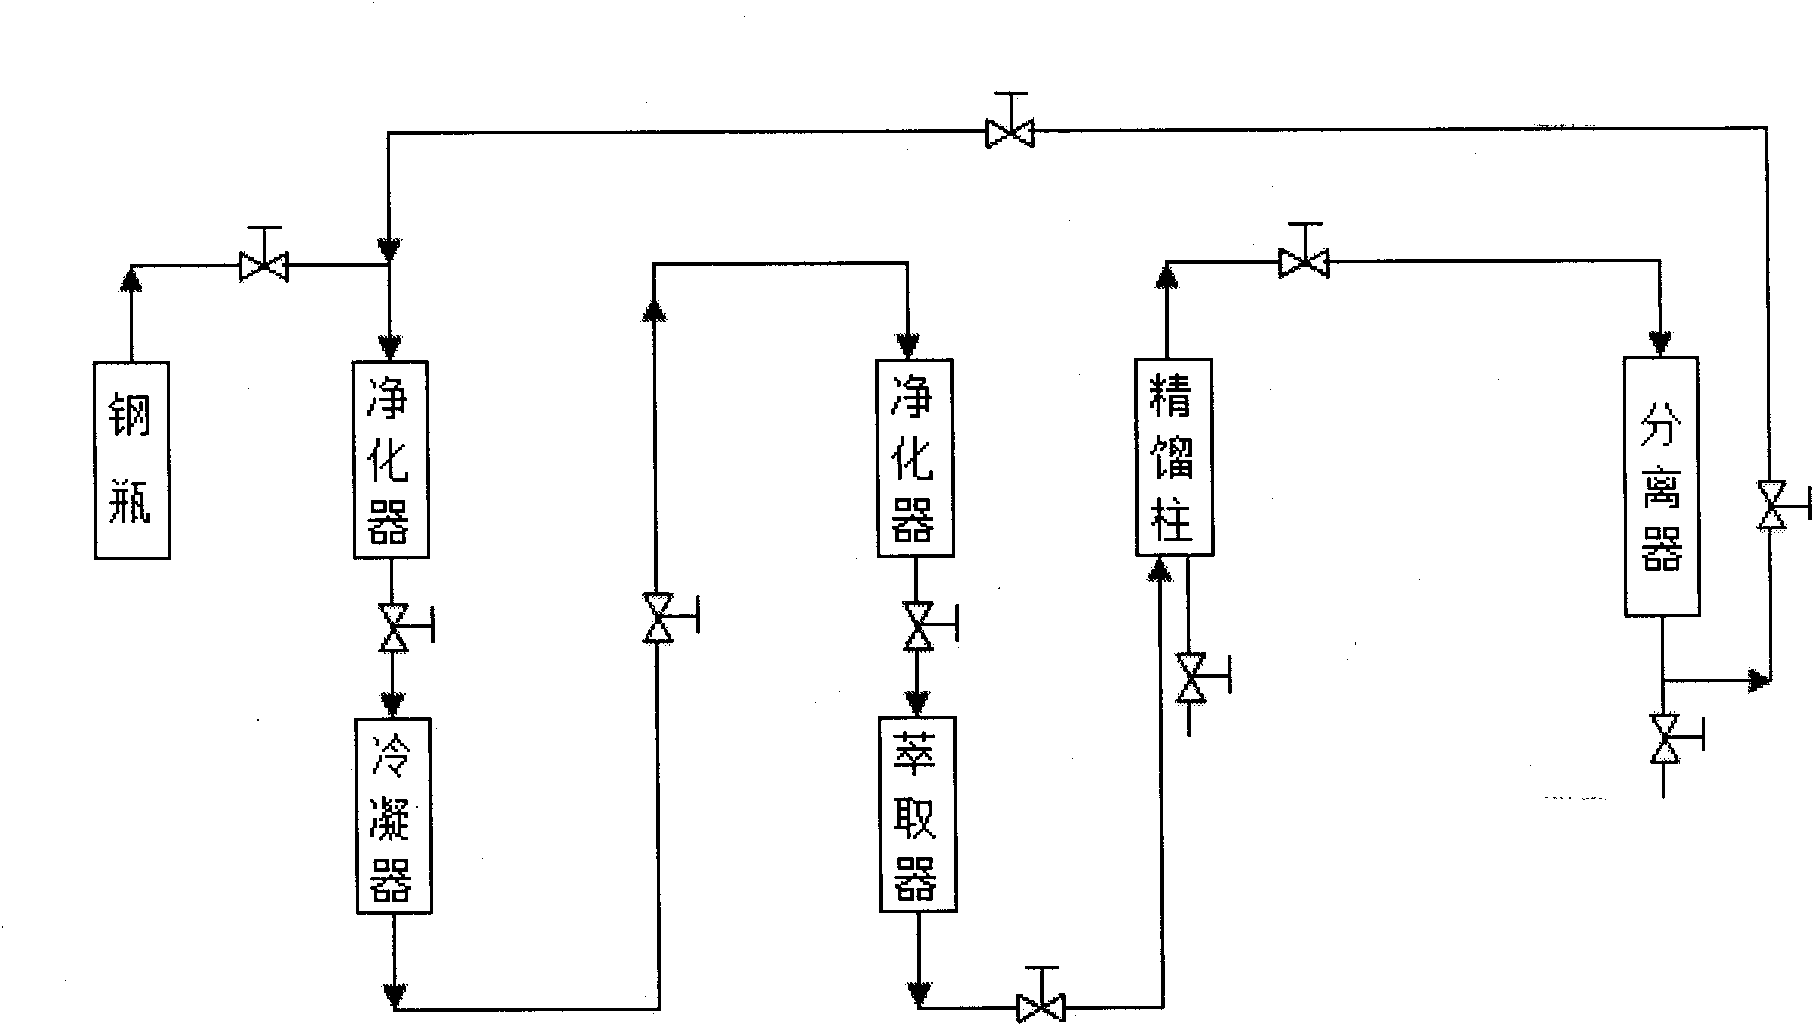 Method for extracting rice bran oil by using ionic liquid and supercritical carbon dioxide (CO2)